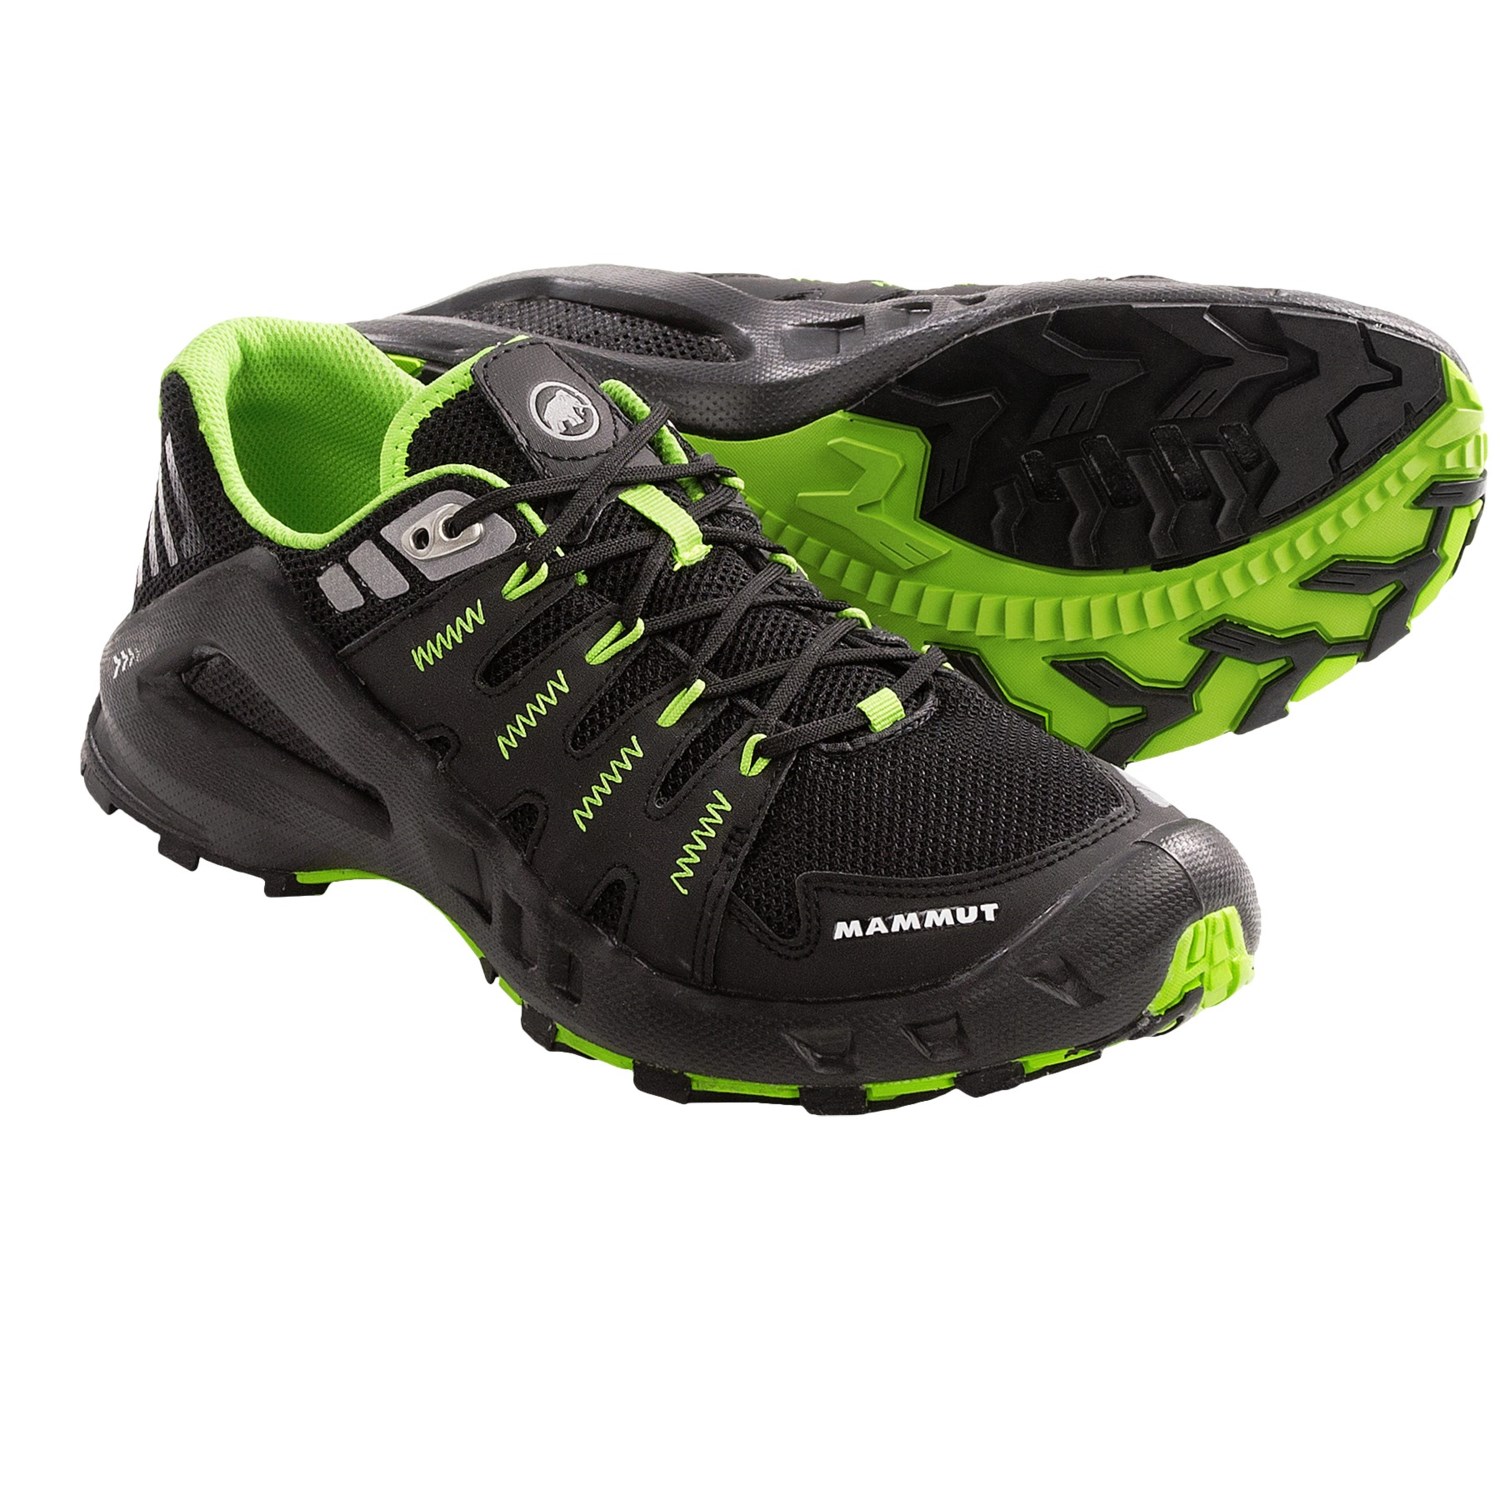 Mammut MTR 71 Trail Running Shoes (For Men) 6946W - Save 31%